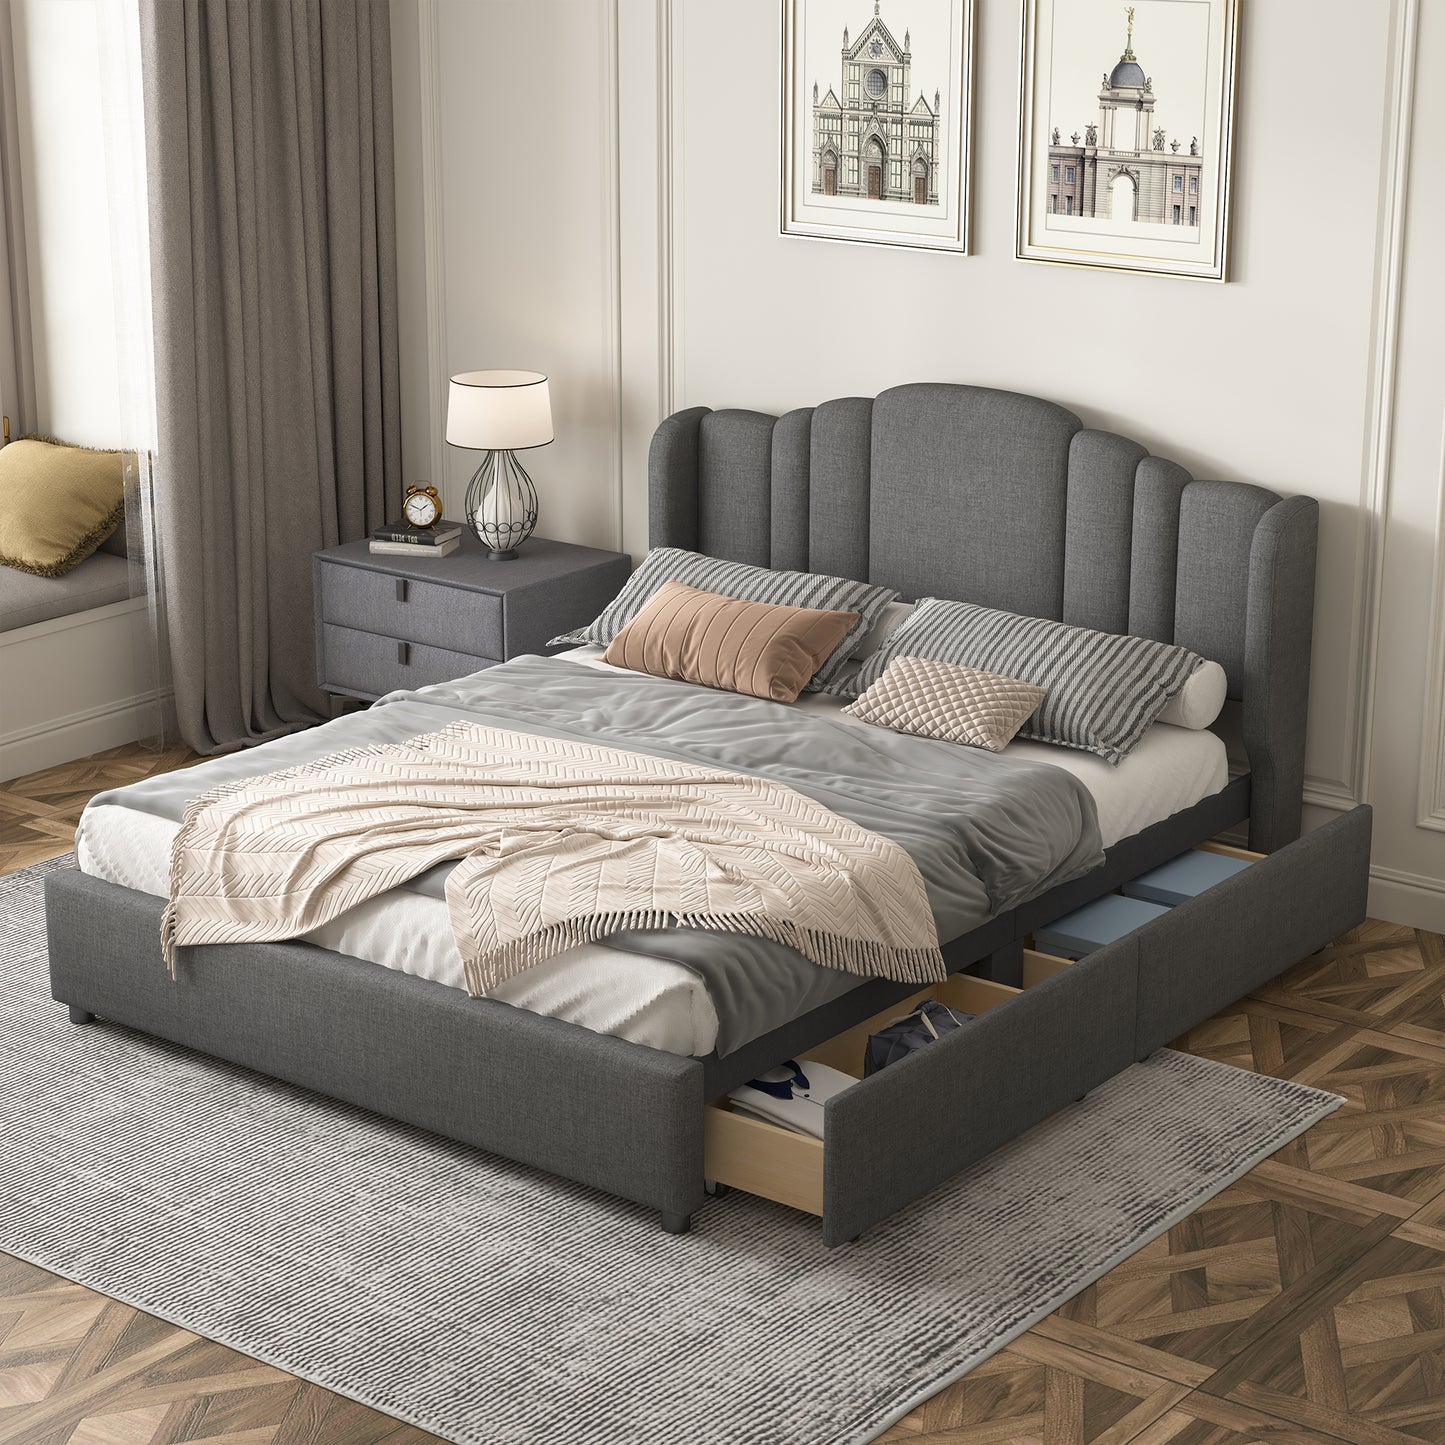 Madrid Queen Size Bed